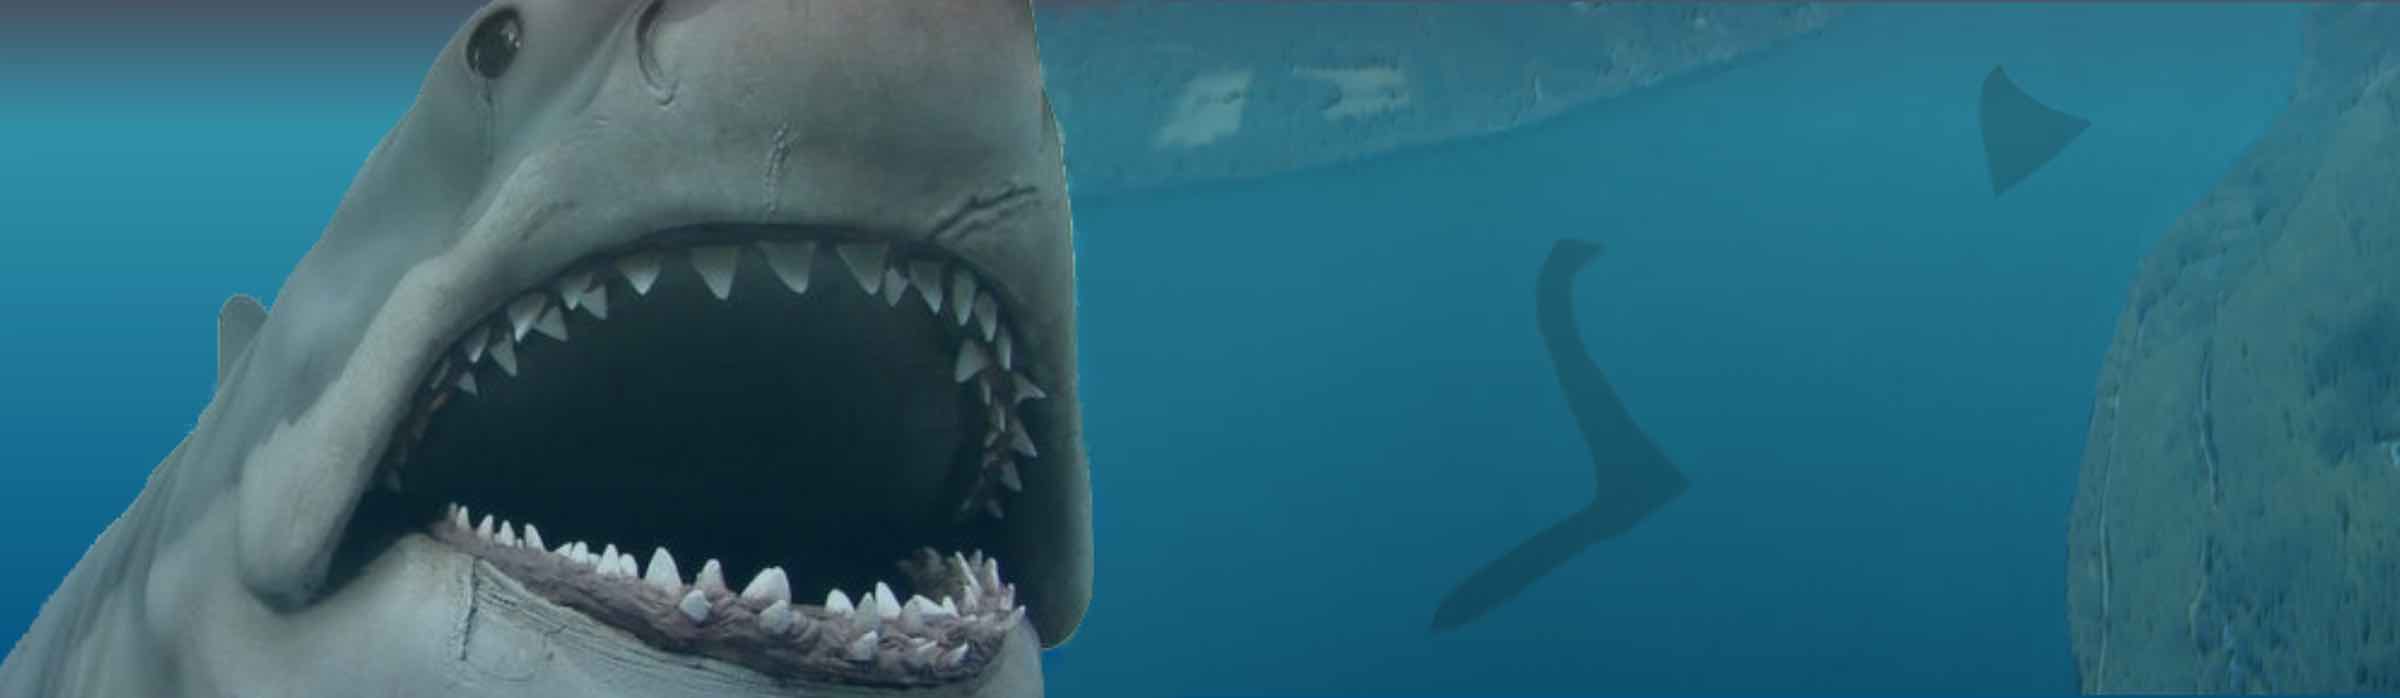 We have the whole scoop on 'Sharkloch' that has 'Jaws' fans fired up over the effects. You’re going to want to see this one. Here's the latest.